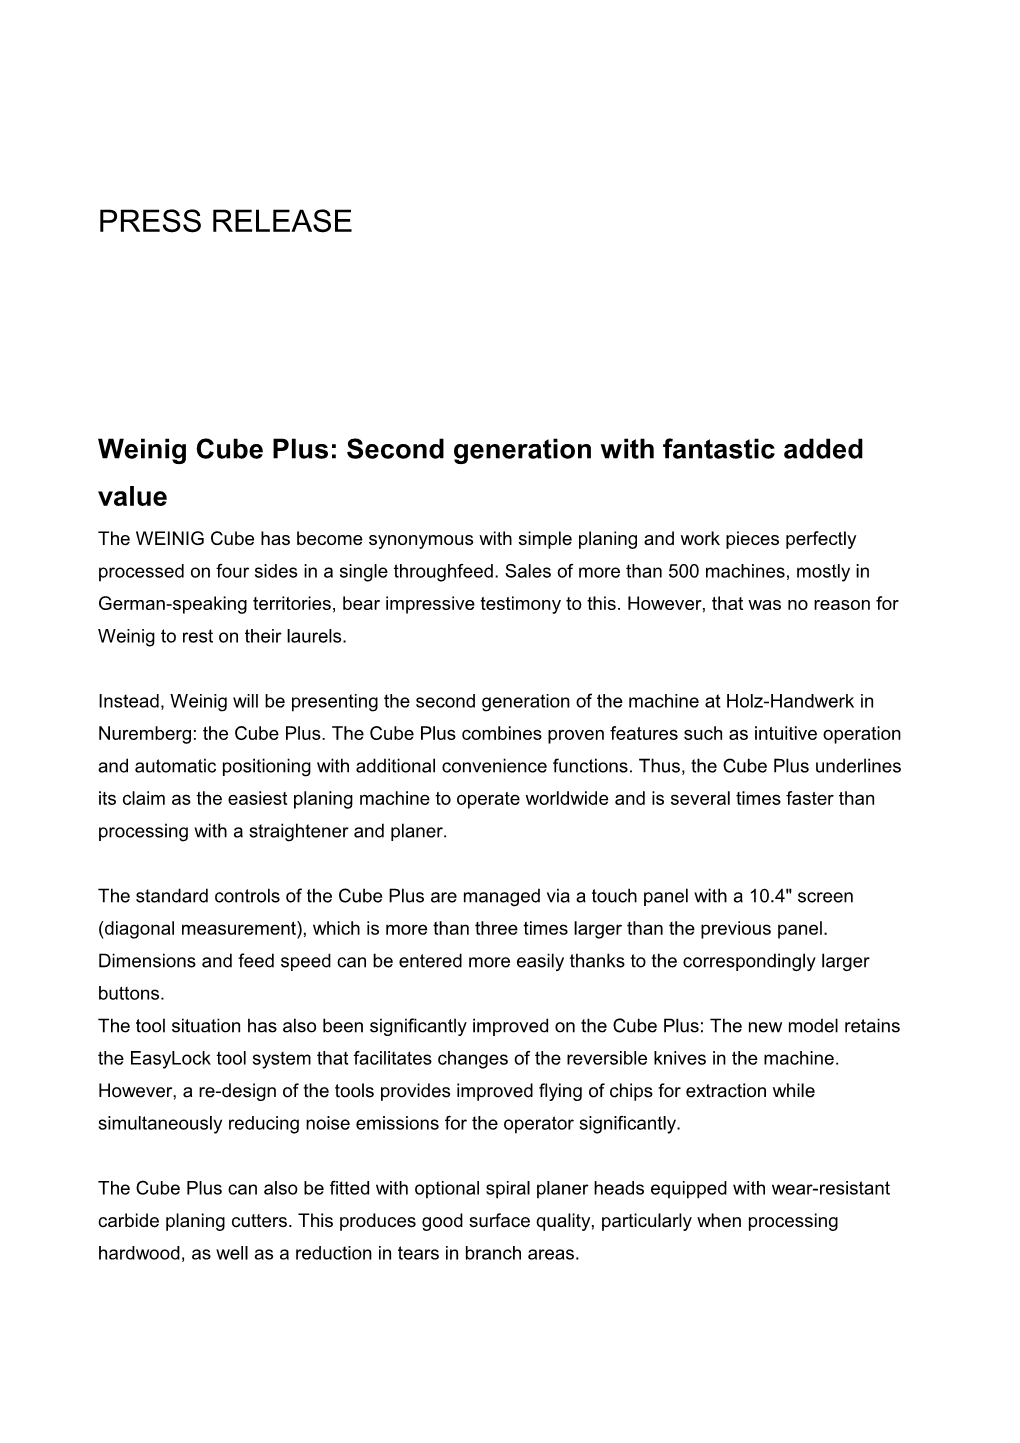 Weinig Cube Plus: Second Generation with Fantastic Added Value